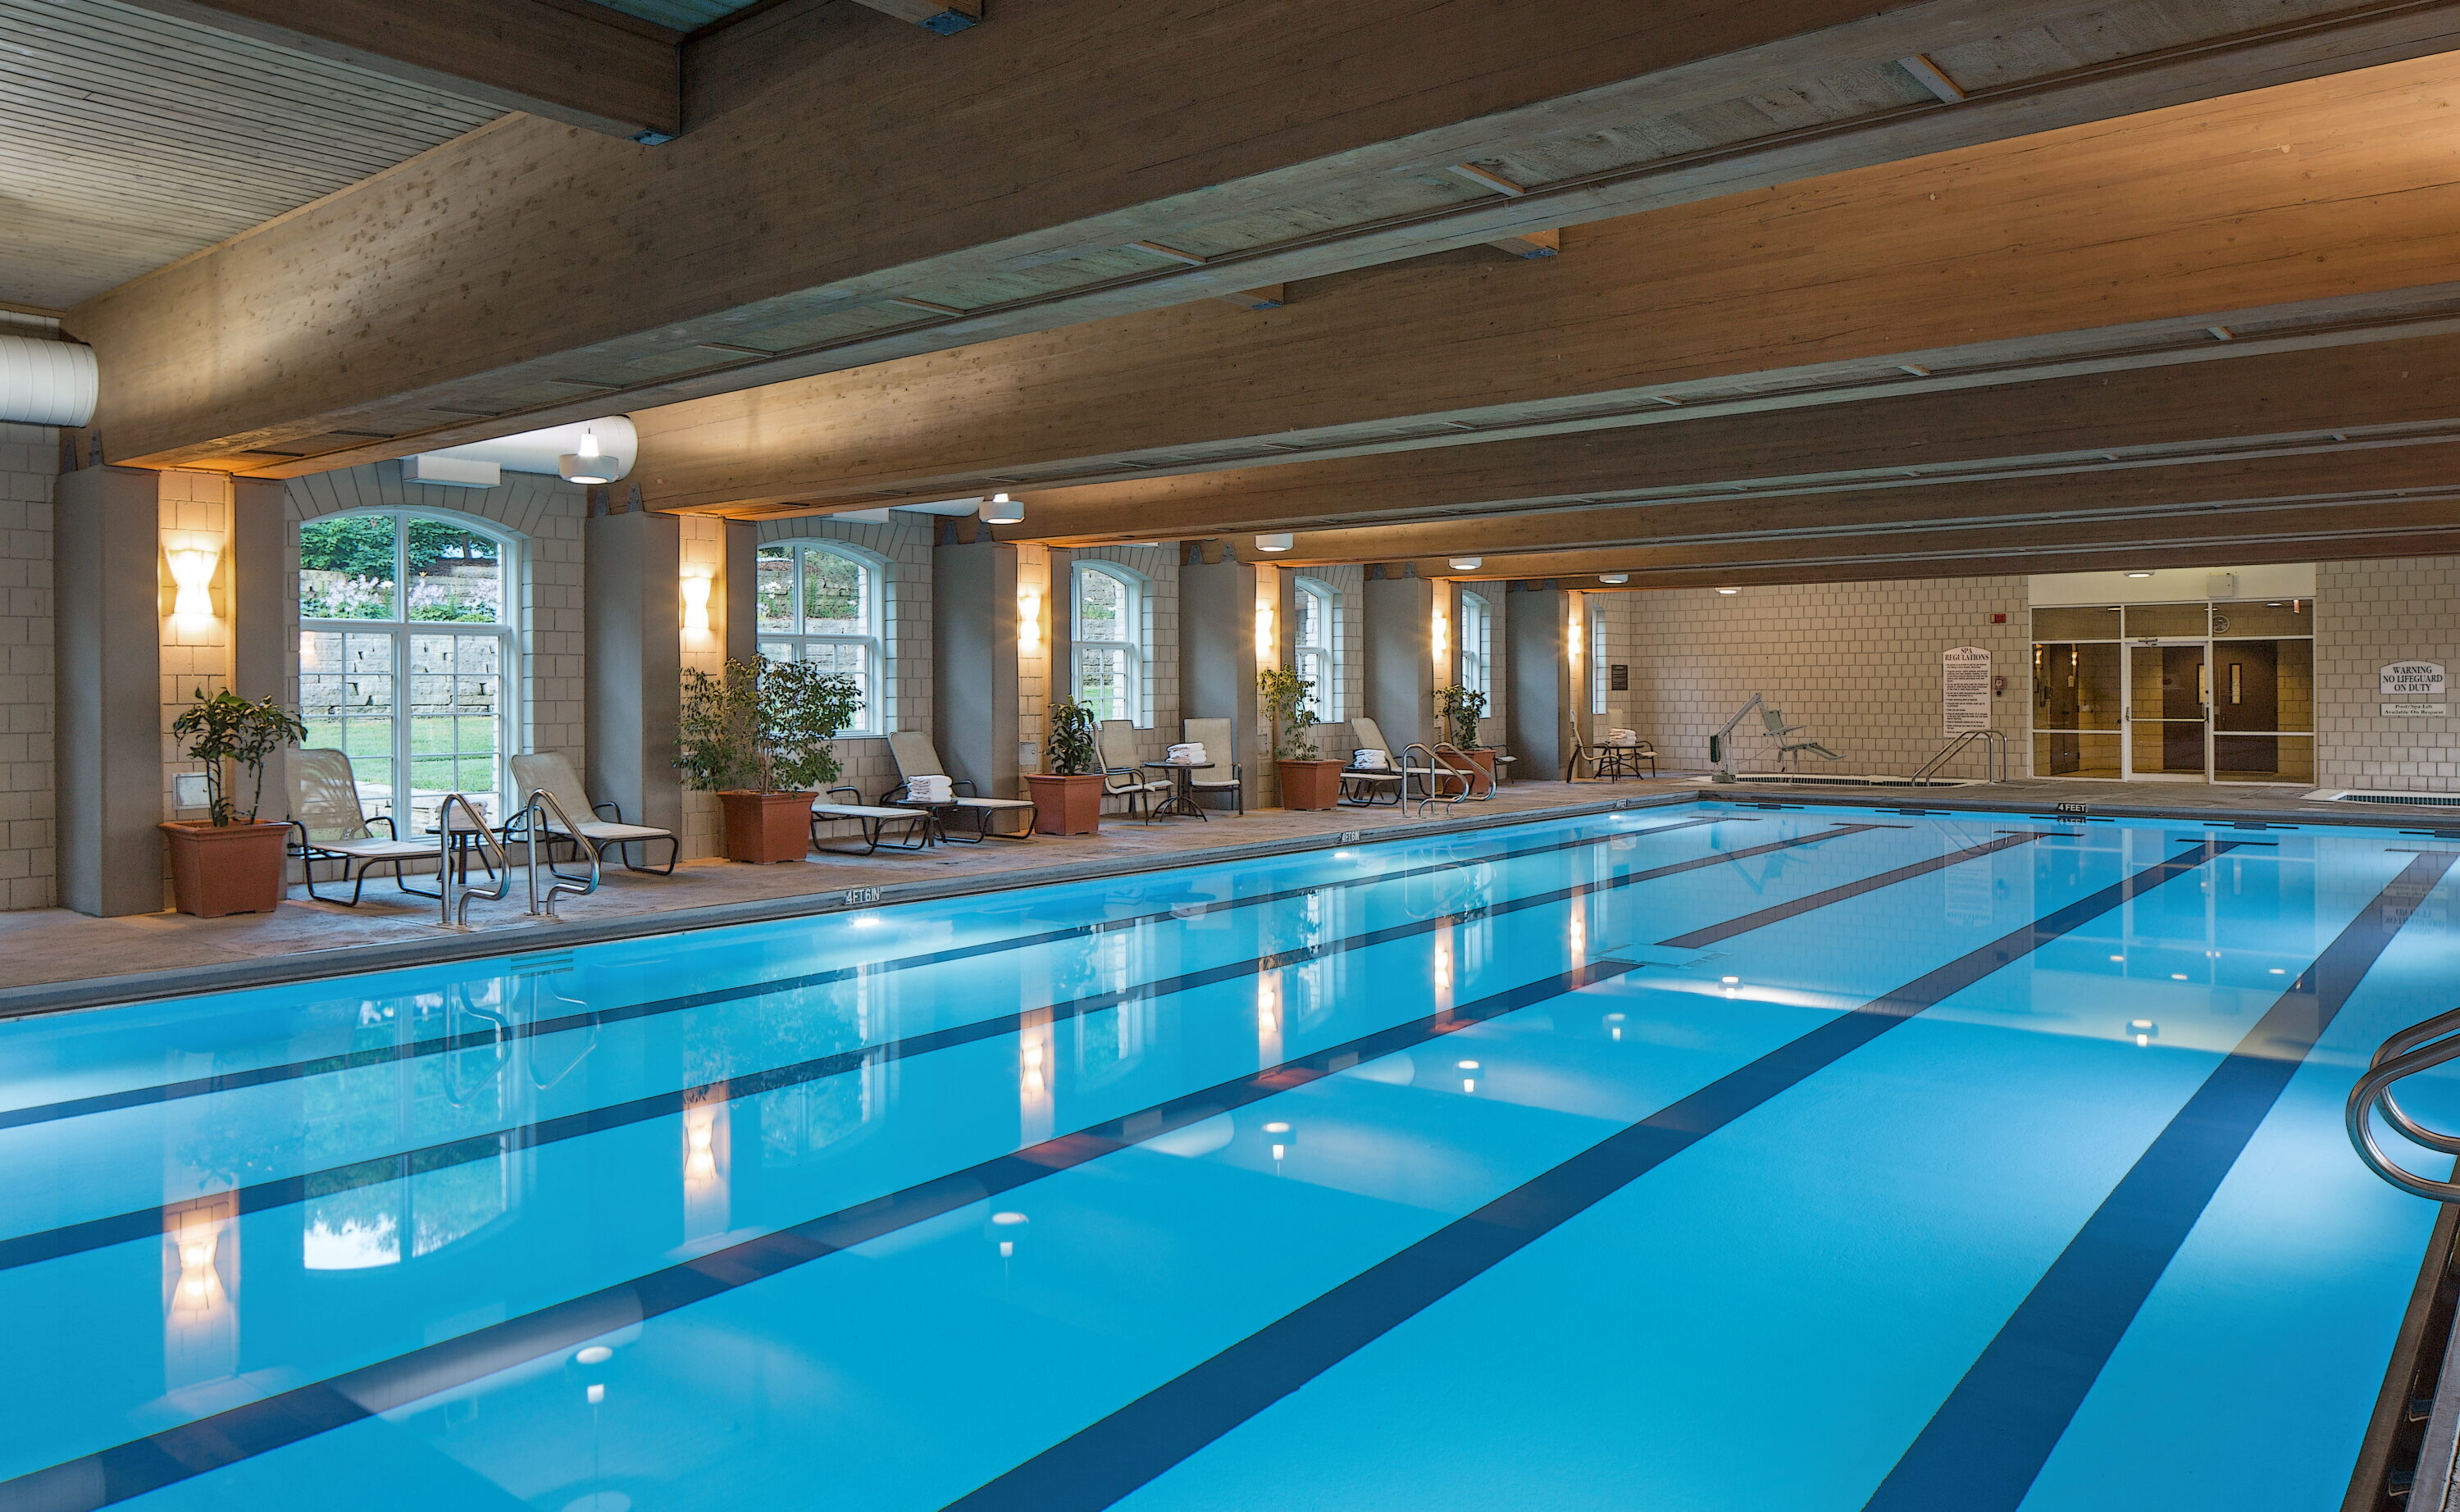  The Olympic-sized indoor pool and children's pool provide water fun for everyone. There's also a Jacuzzi